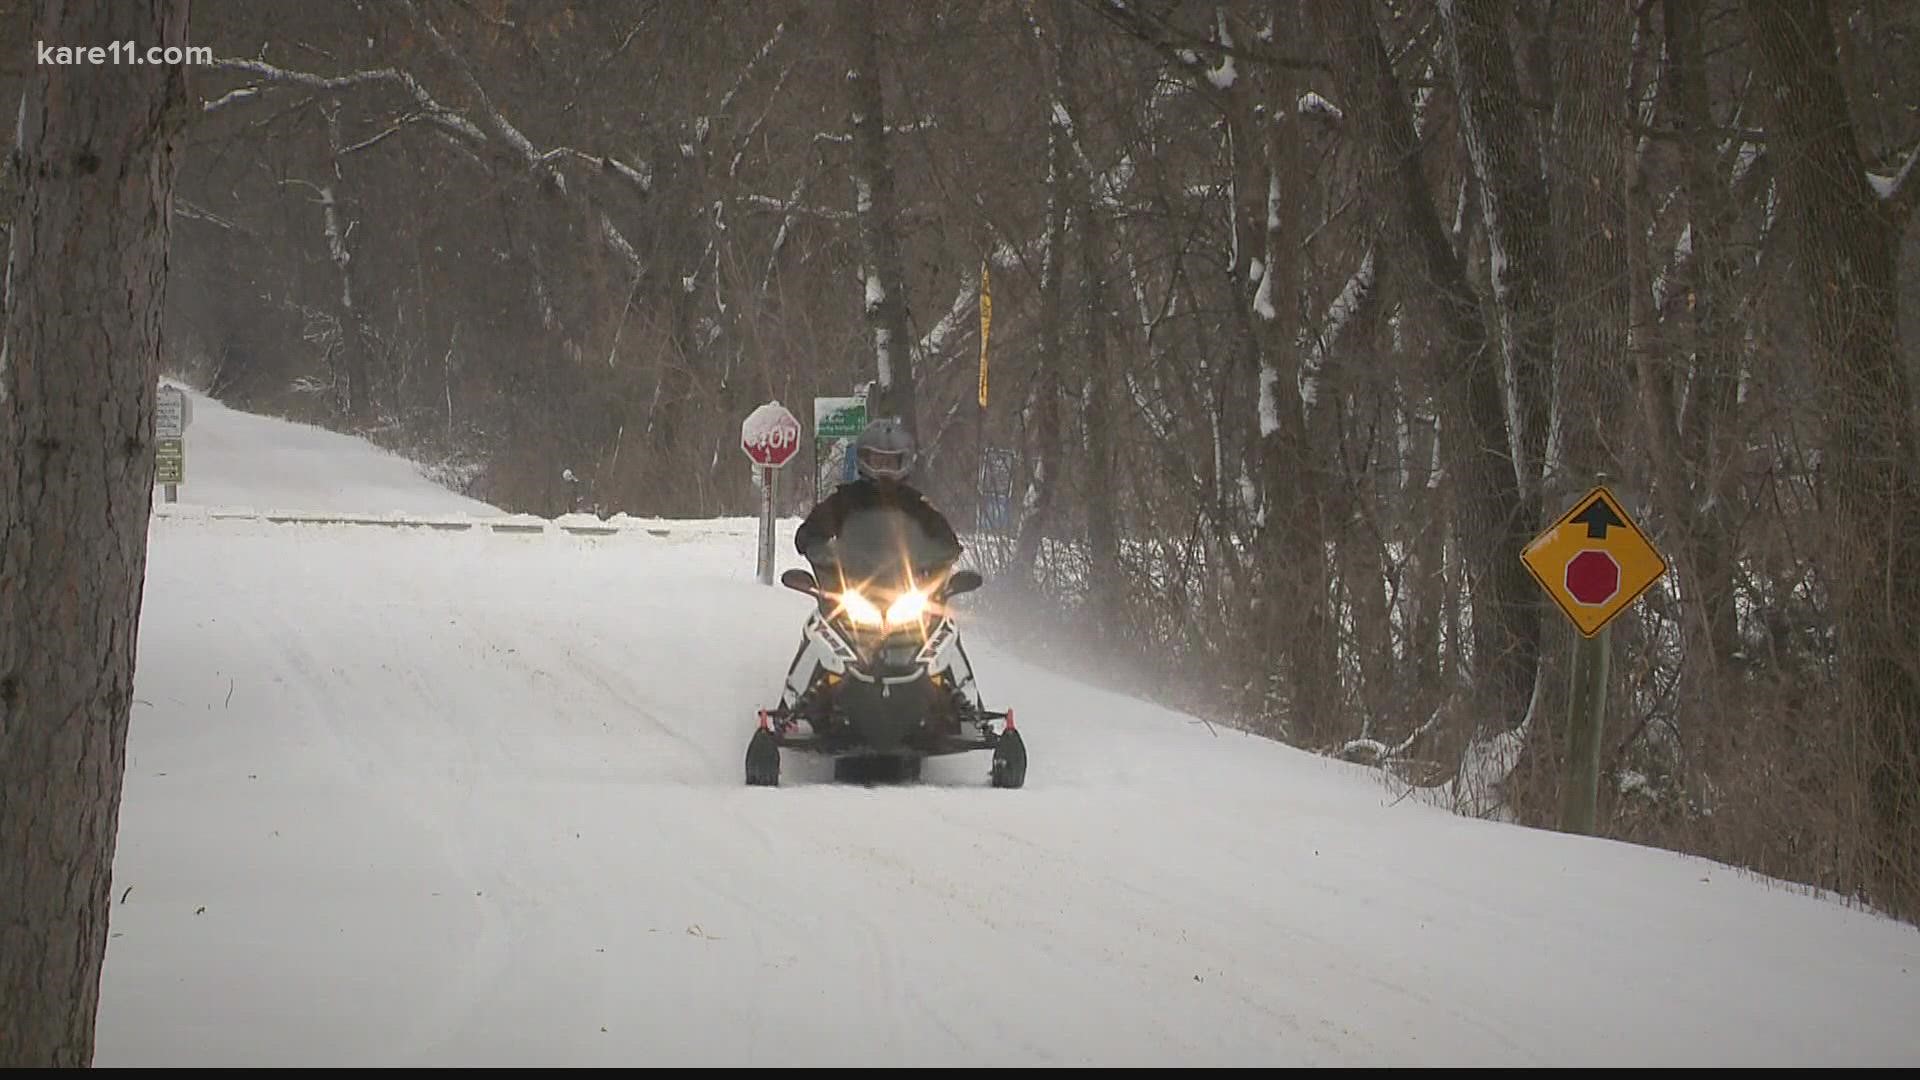 Here are some reminders if you're hitting the trails, in light of recent incidents involving snowmobiles in Minnesota.